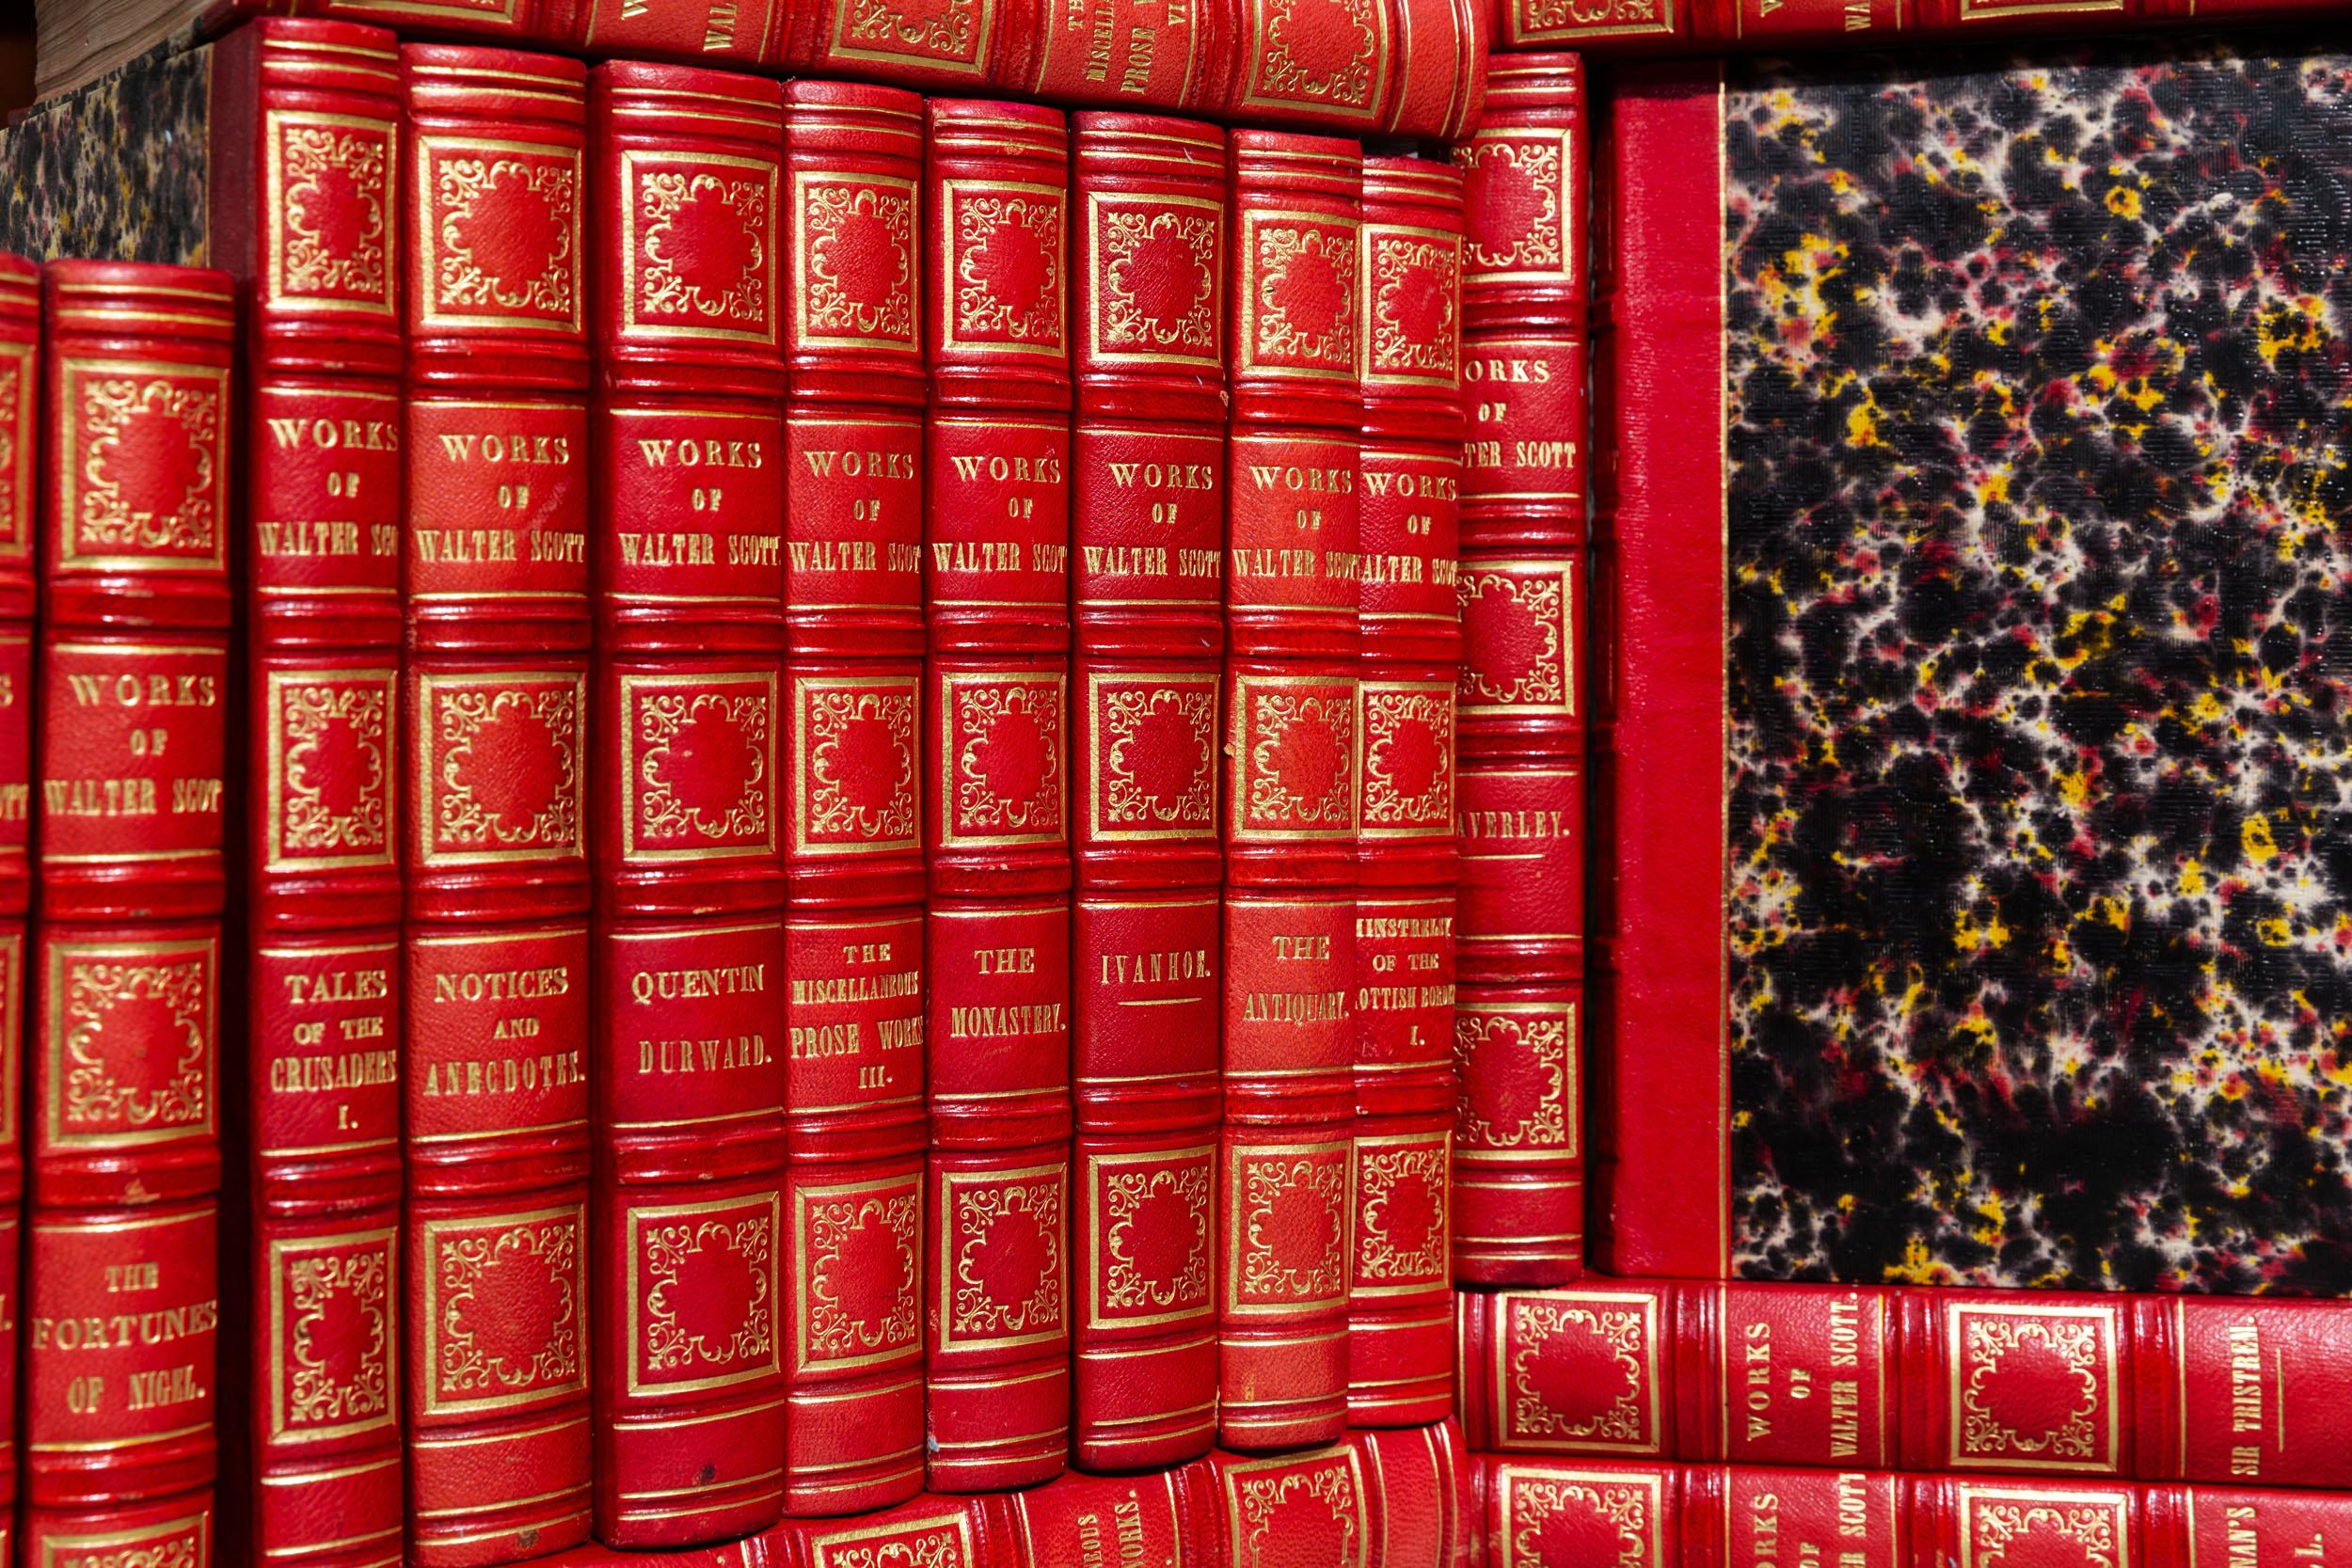 43 volumes. Sir Walter Scott. Waverley Novels. Bound in 3/4 Red Morocco, marbled Boards and Edges,
Raised bands, ornate gilt on spines. Published: Paris: Baudry 'S European Library 1838. Handsome set